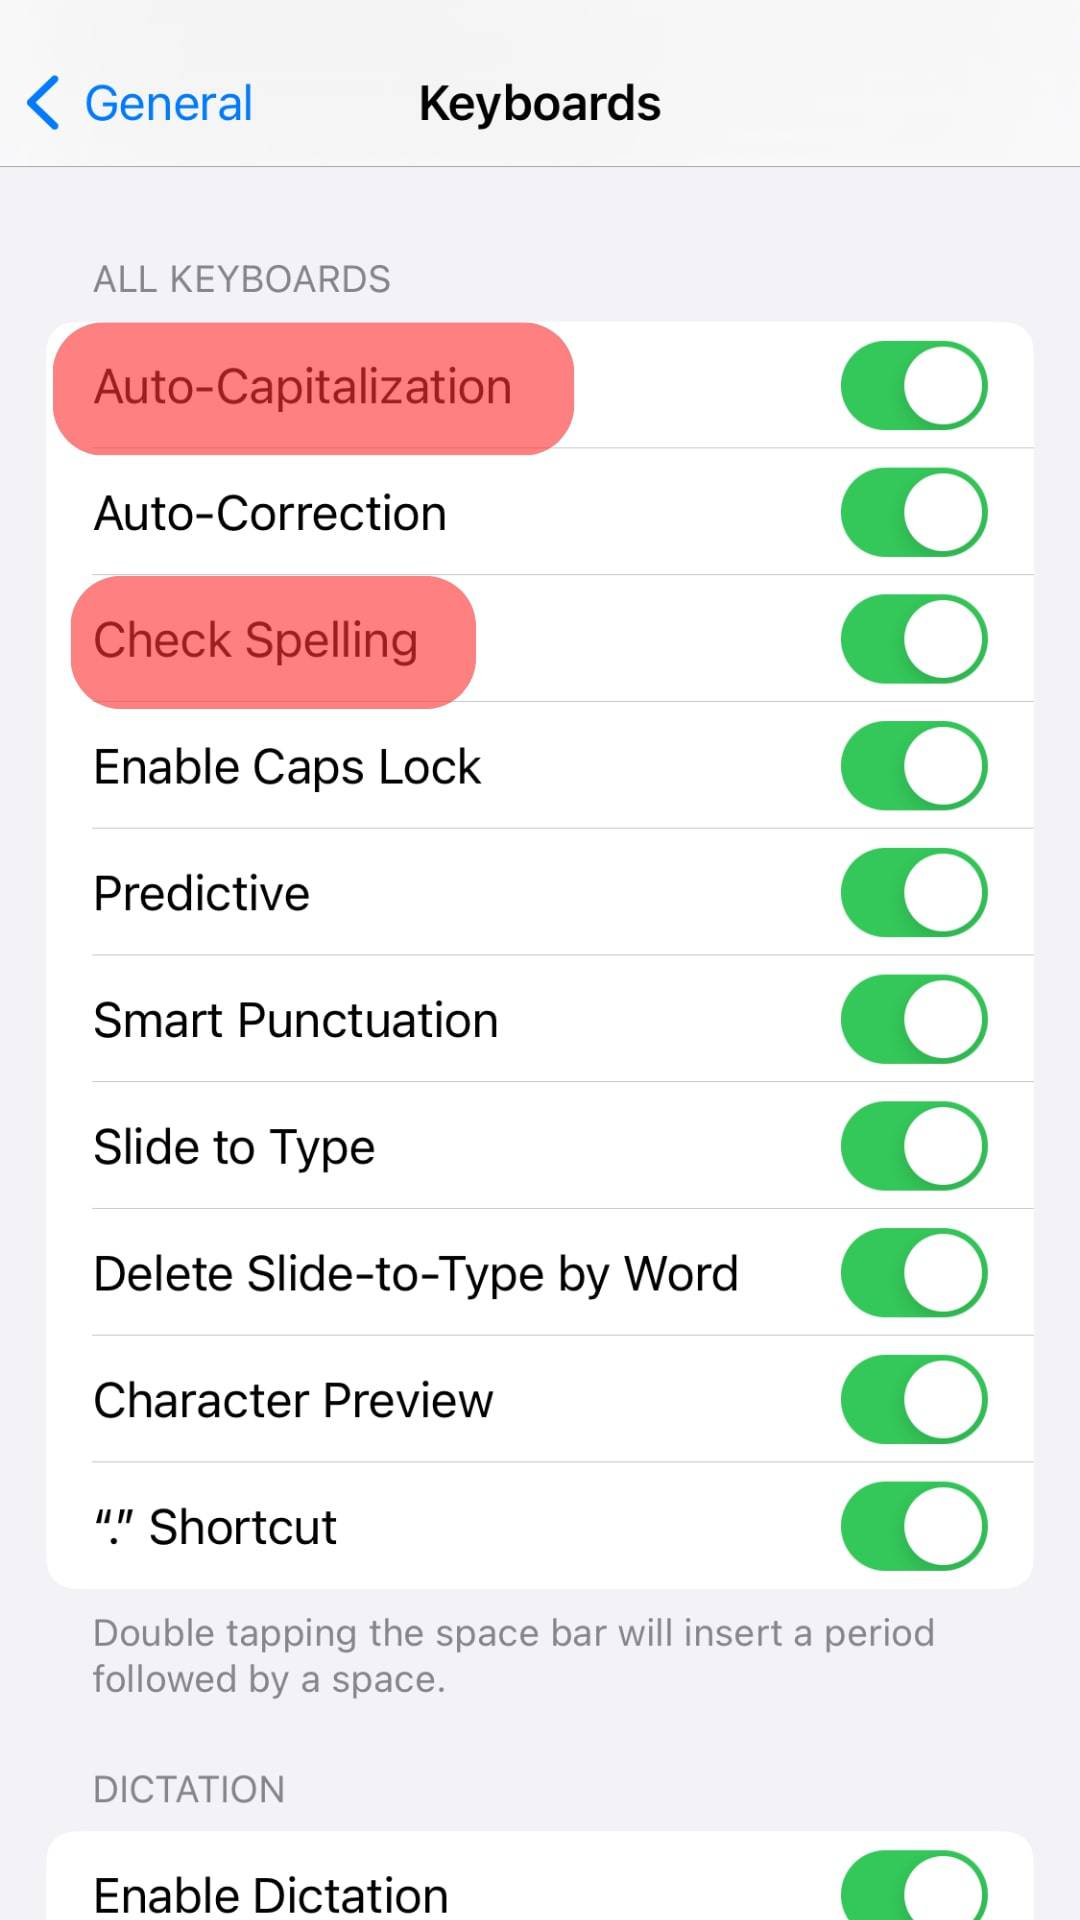 Disable The Auto-Capitalization And Check Spelling Options